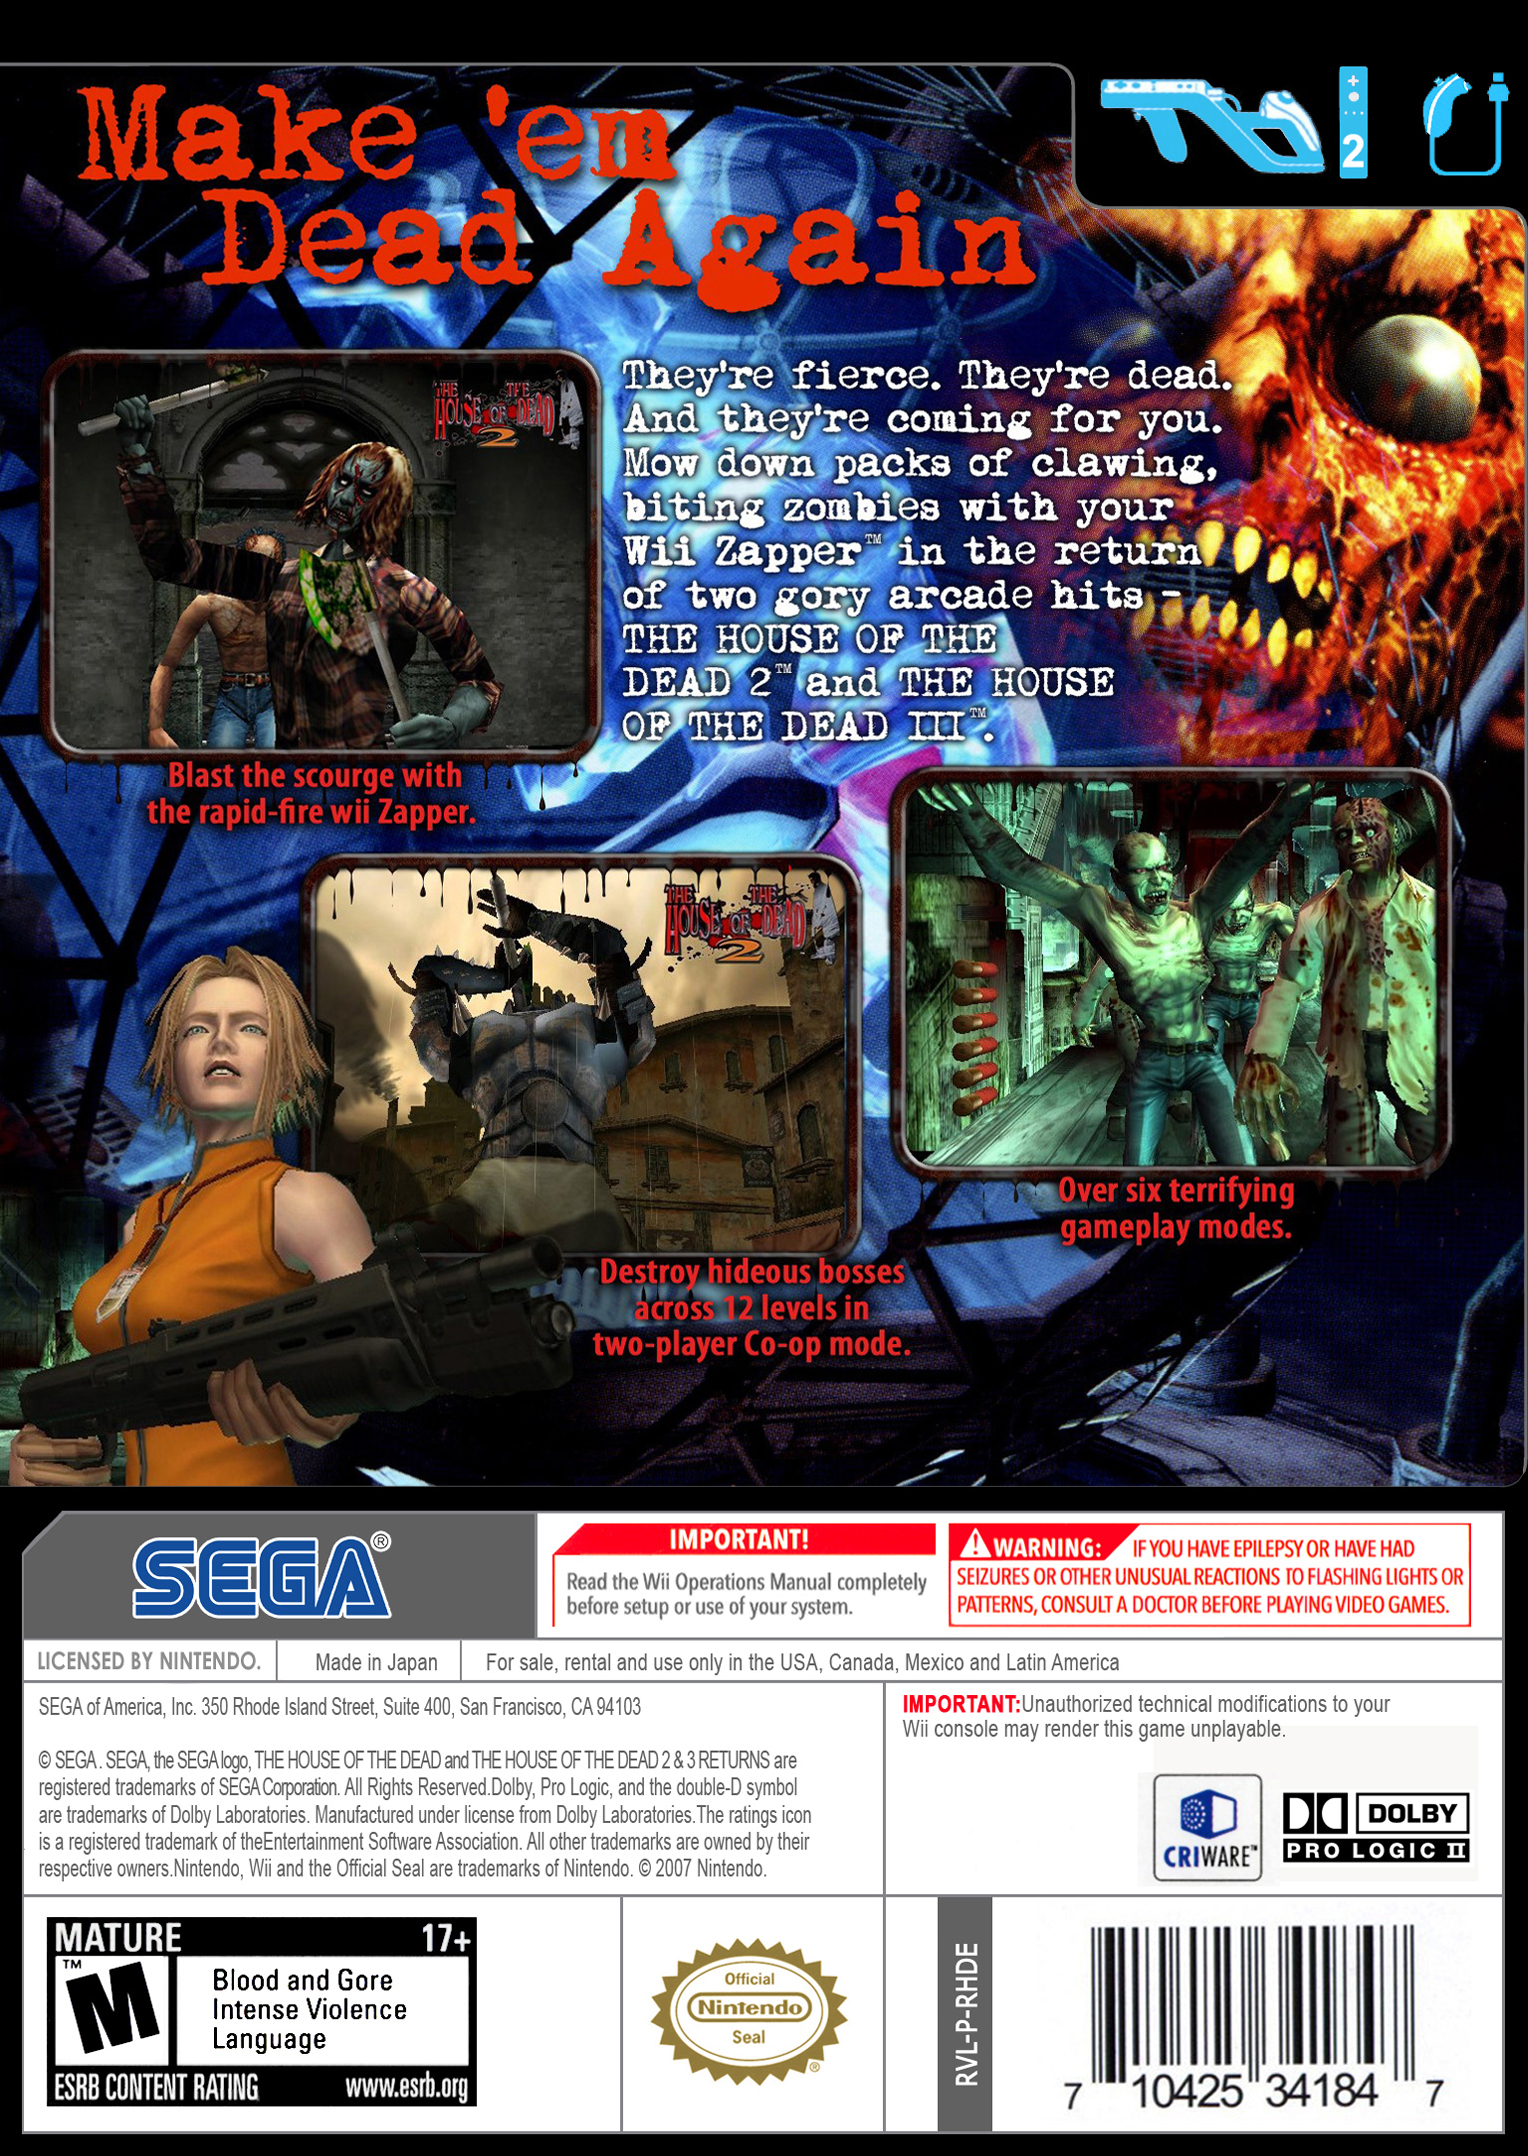 the house of the dead 2 and 3 return wii download